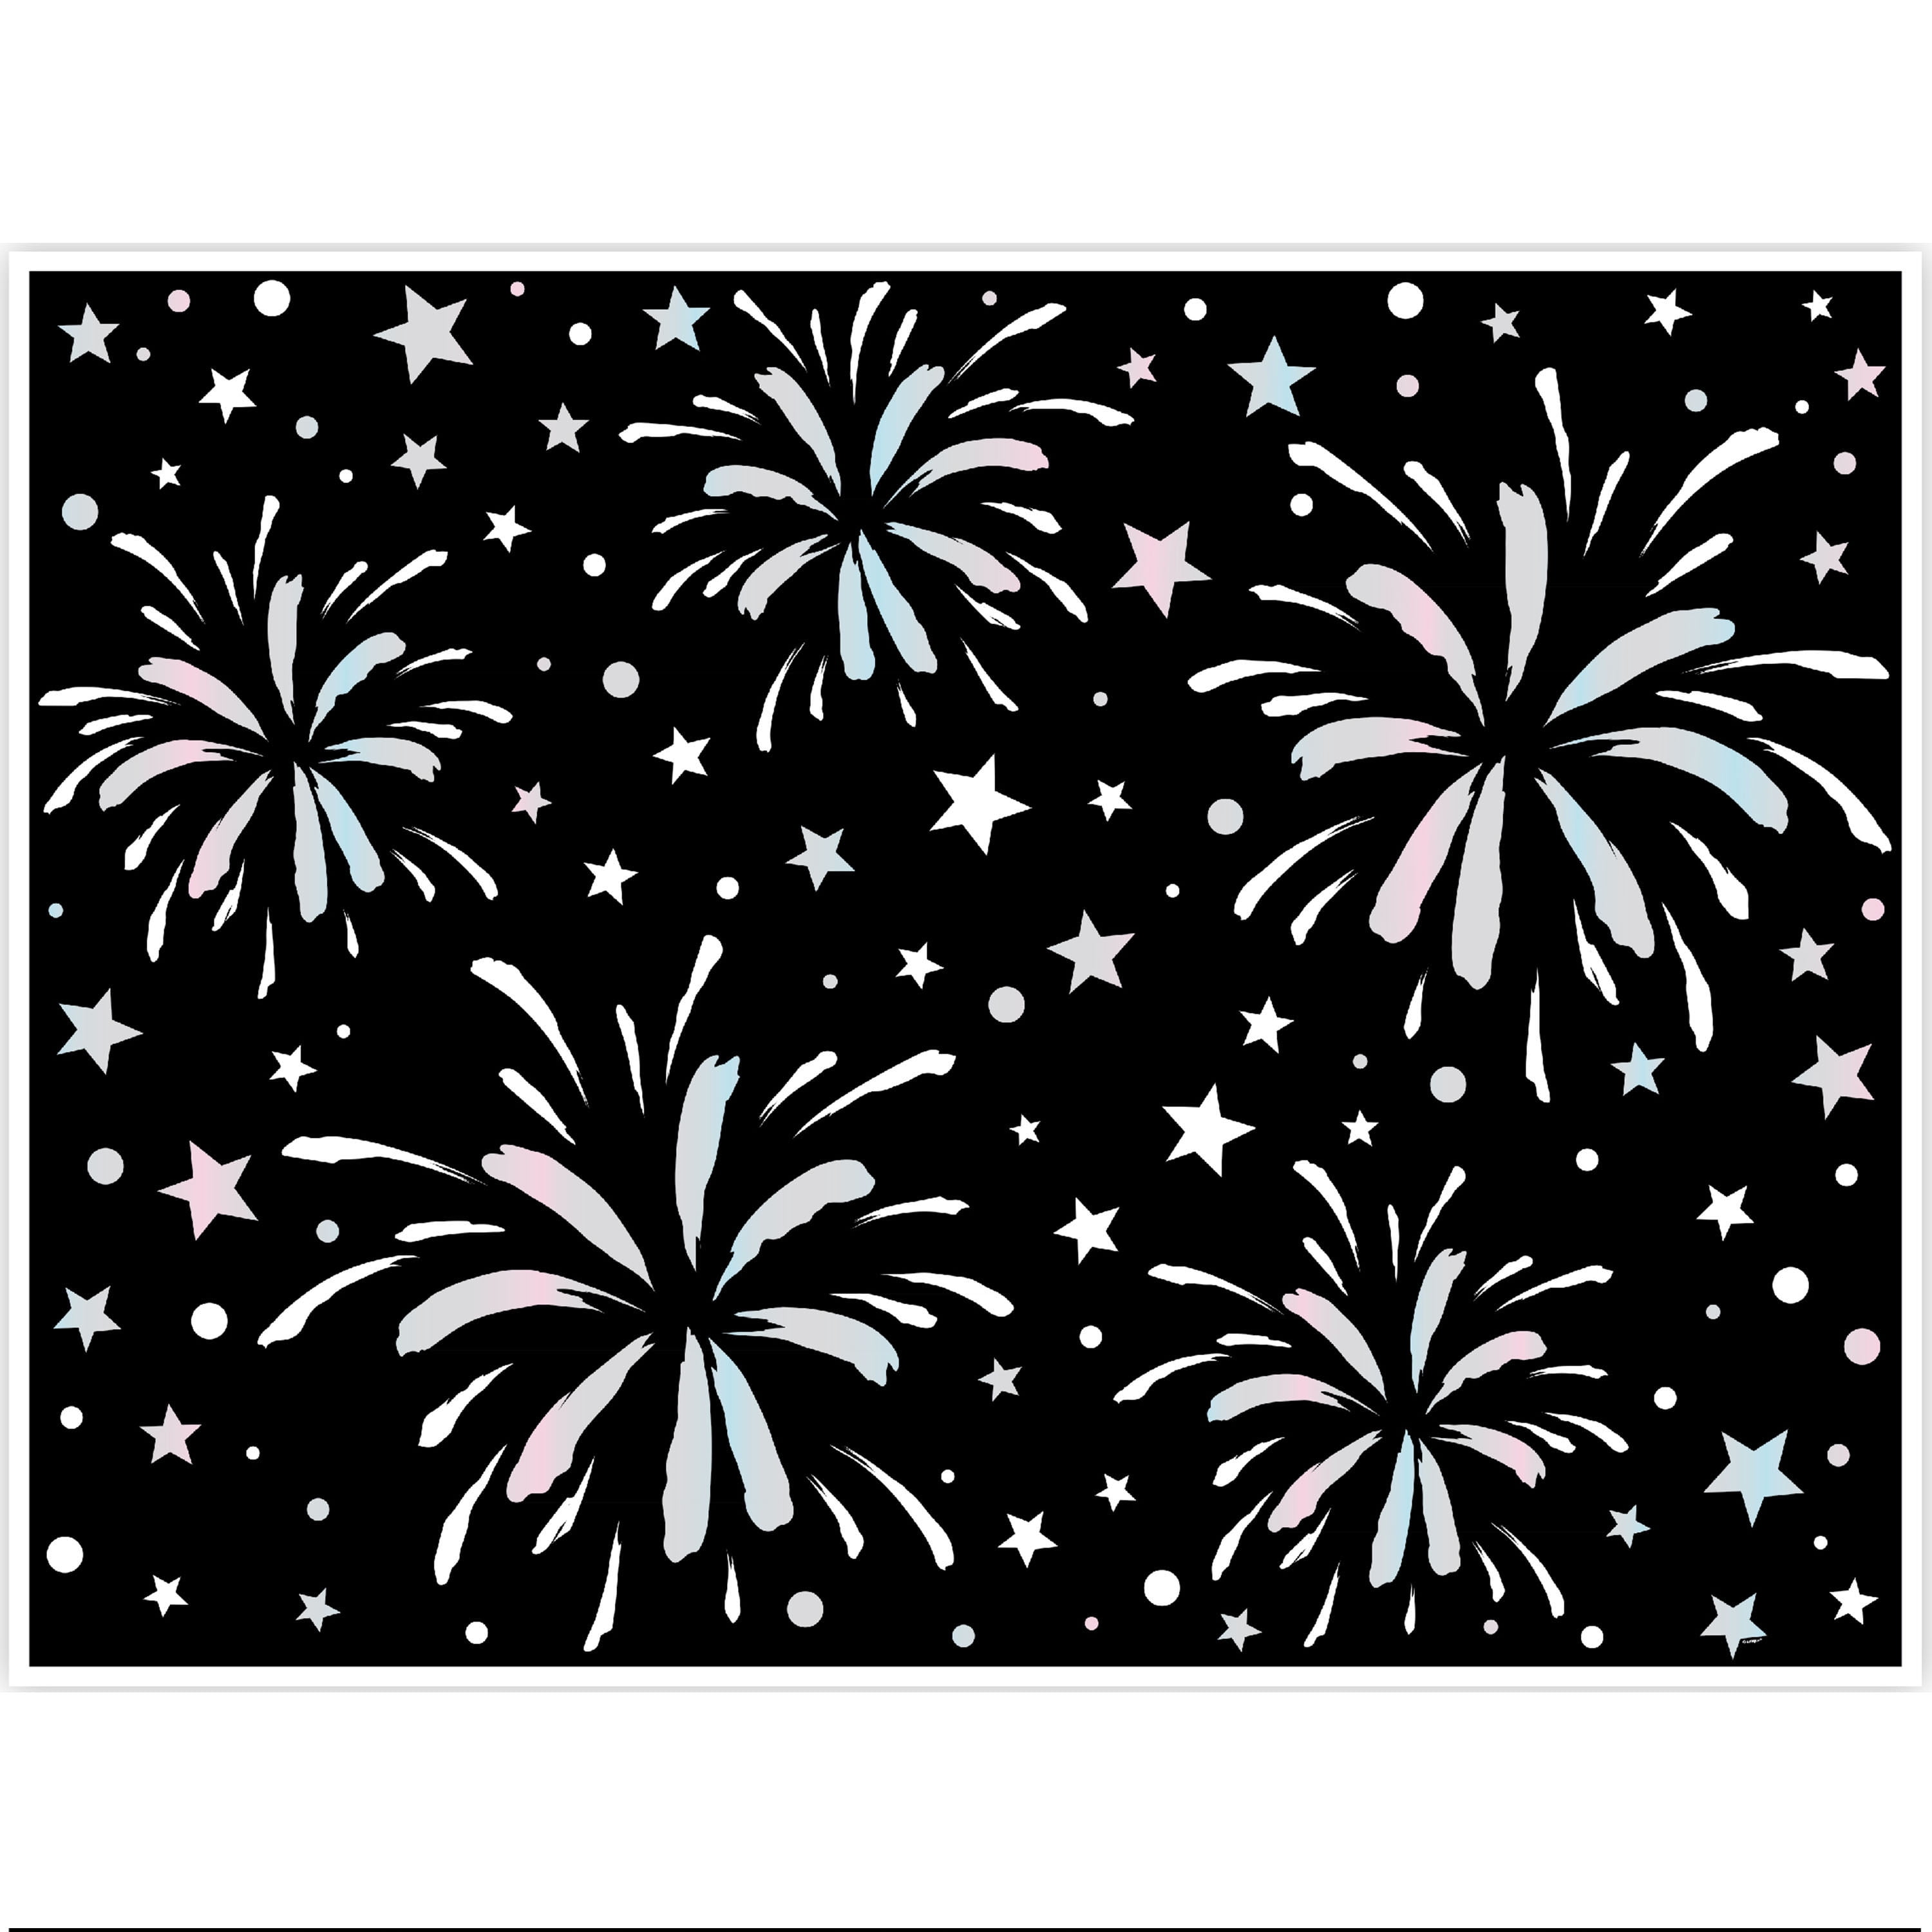 new years fireworks clipart black and white